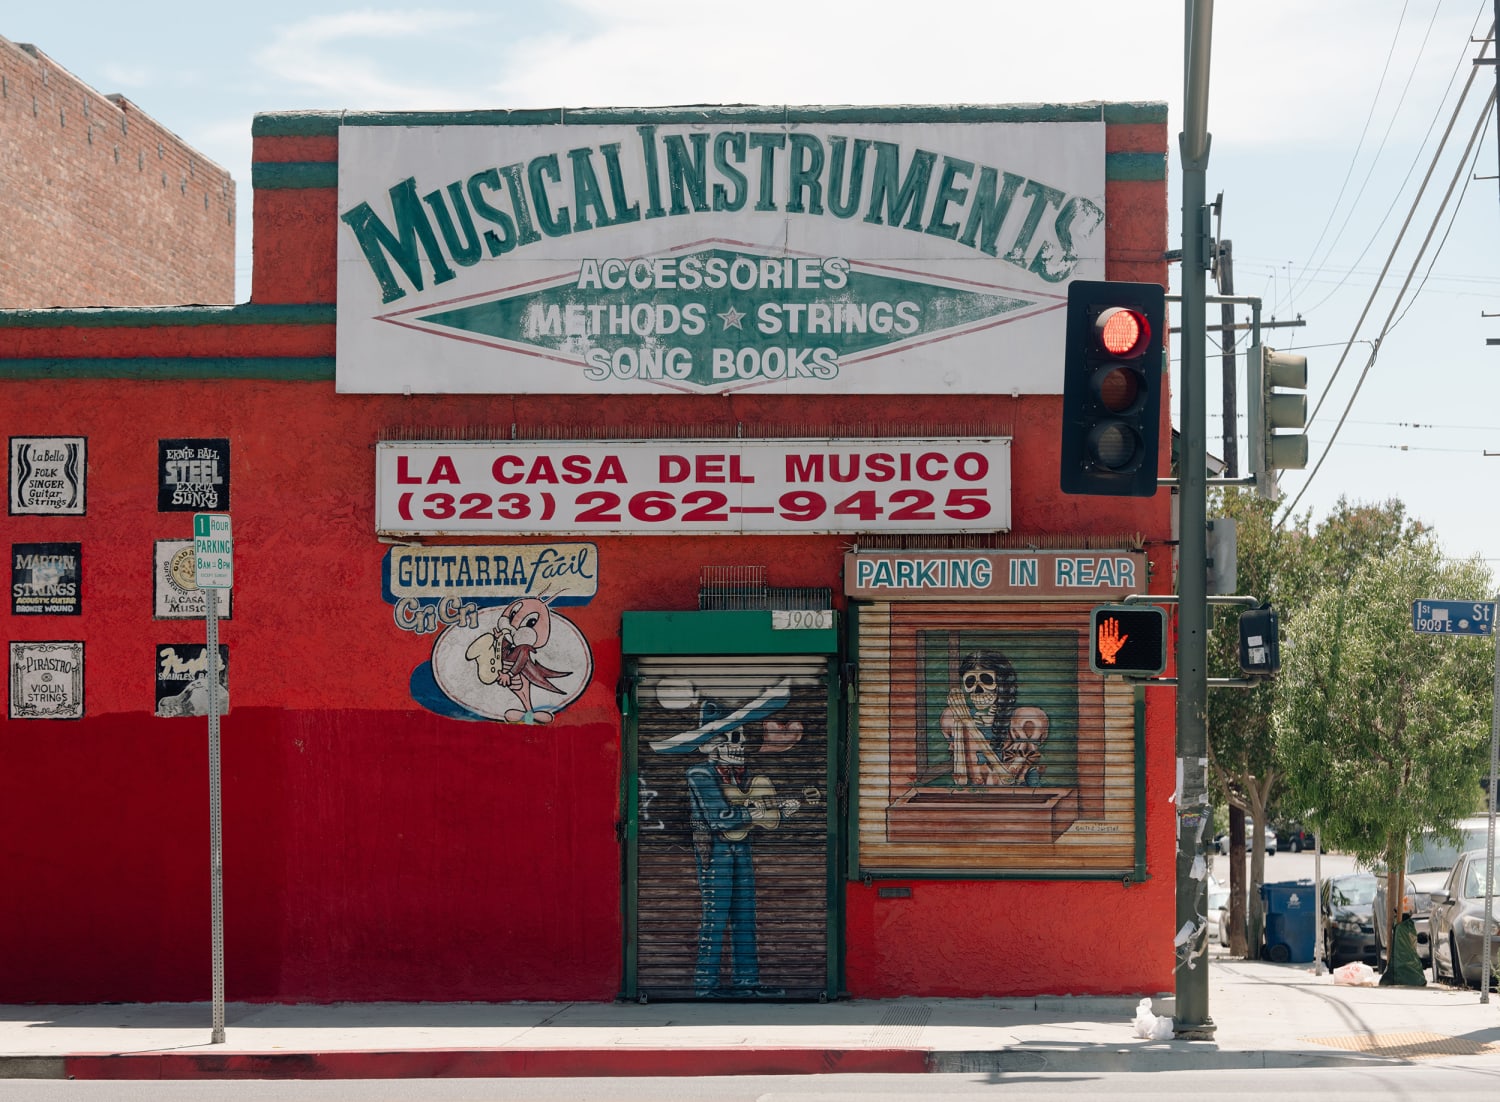 A musical instrument store in Boyle Heights.